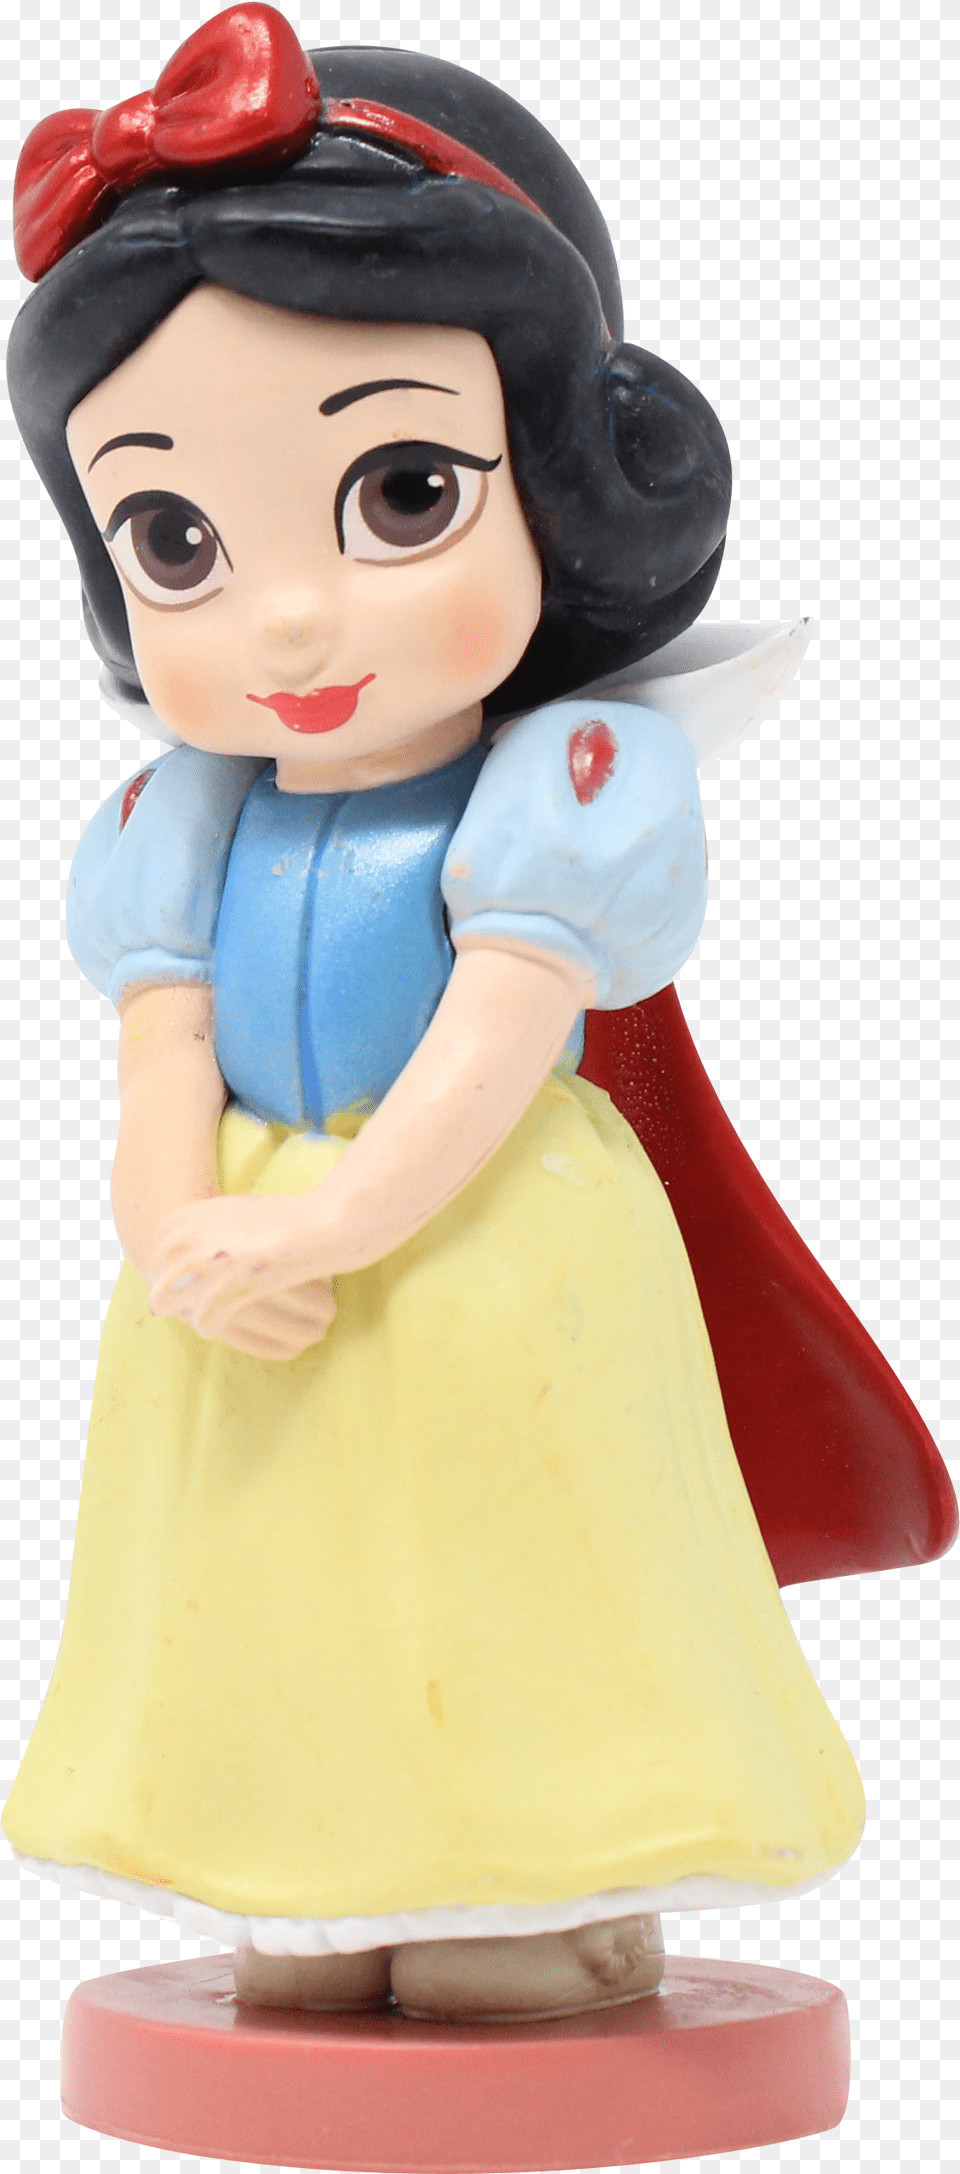 Snow White Toy Transparent Background Transparent Background Toy, Figurine, Baby, Person, Face Png